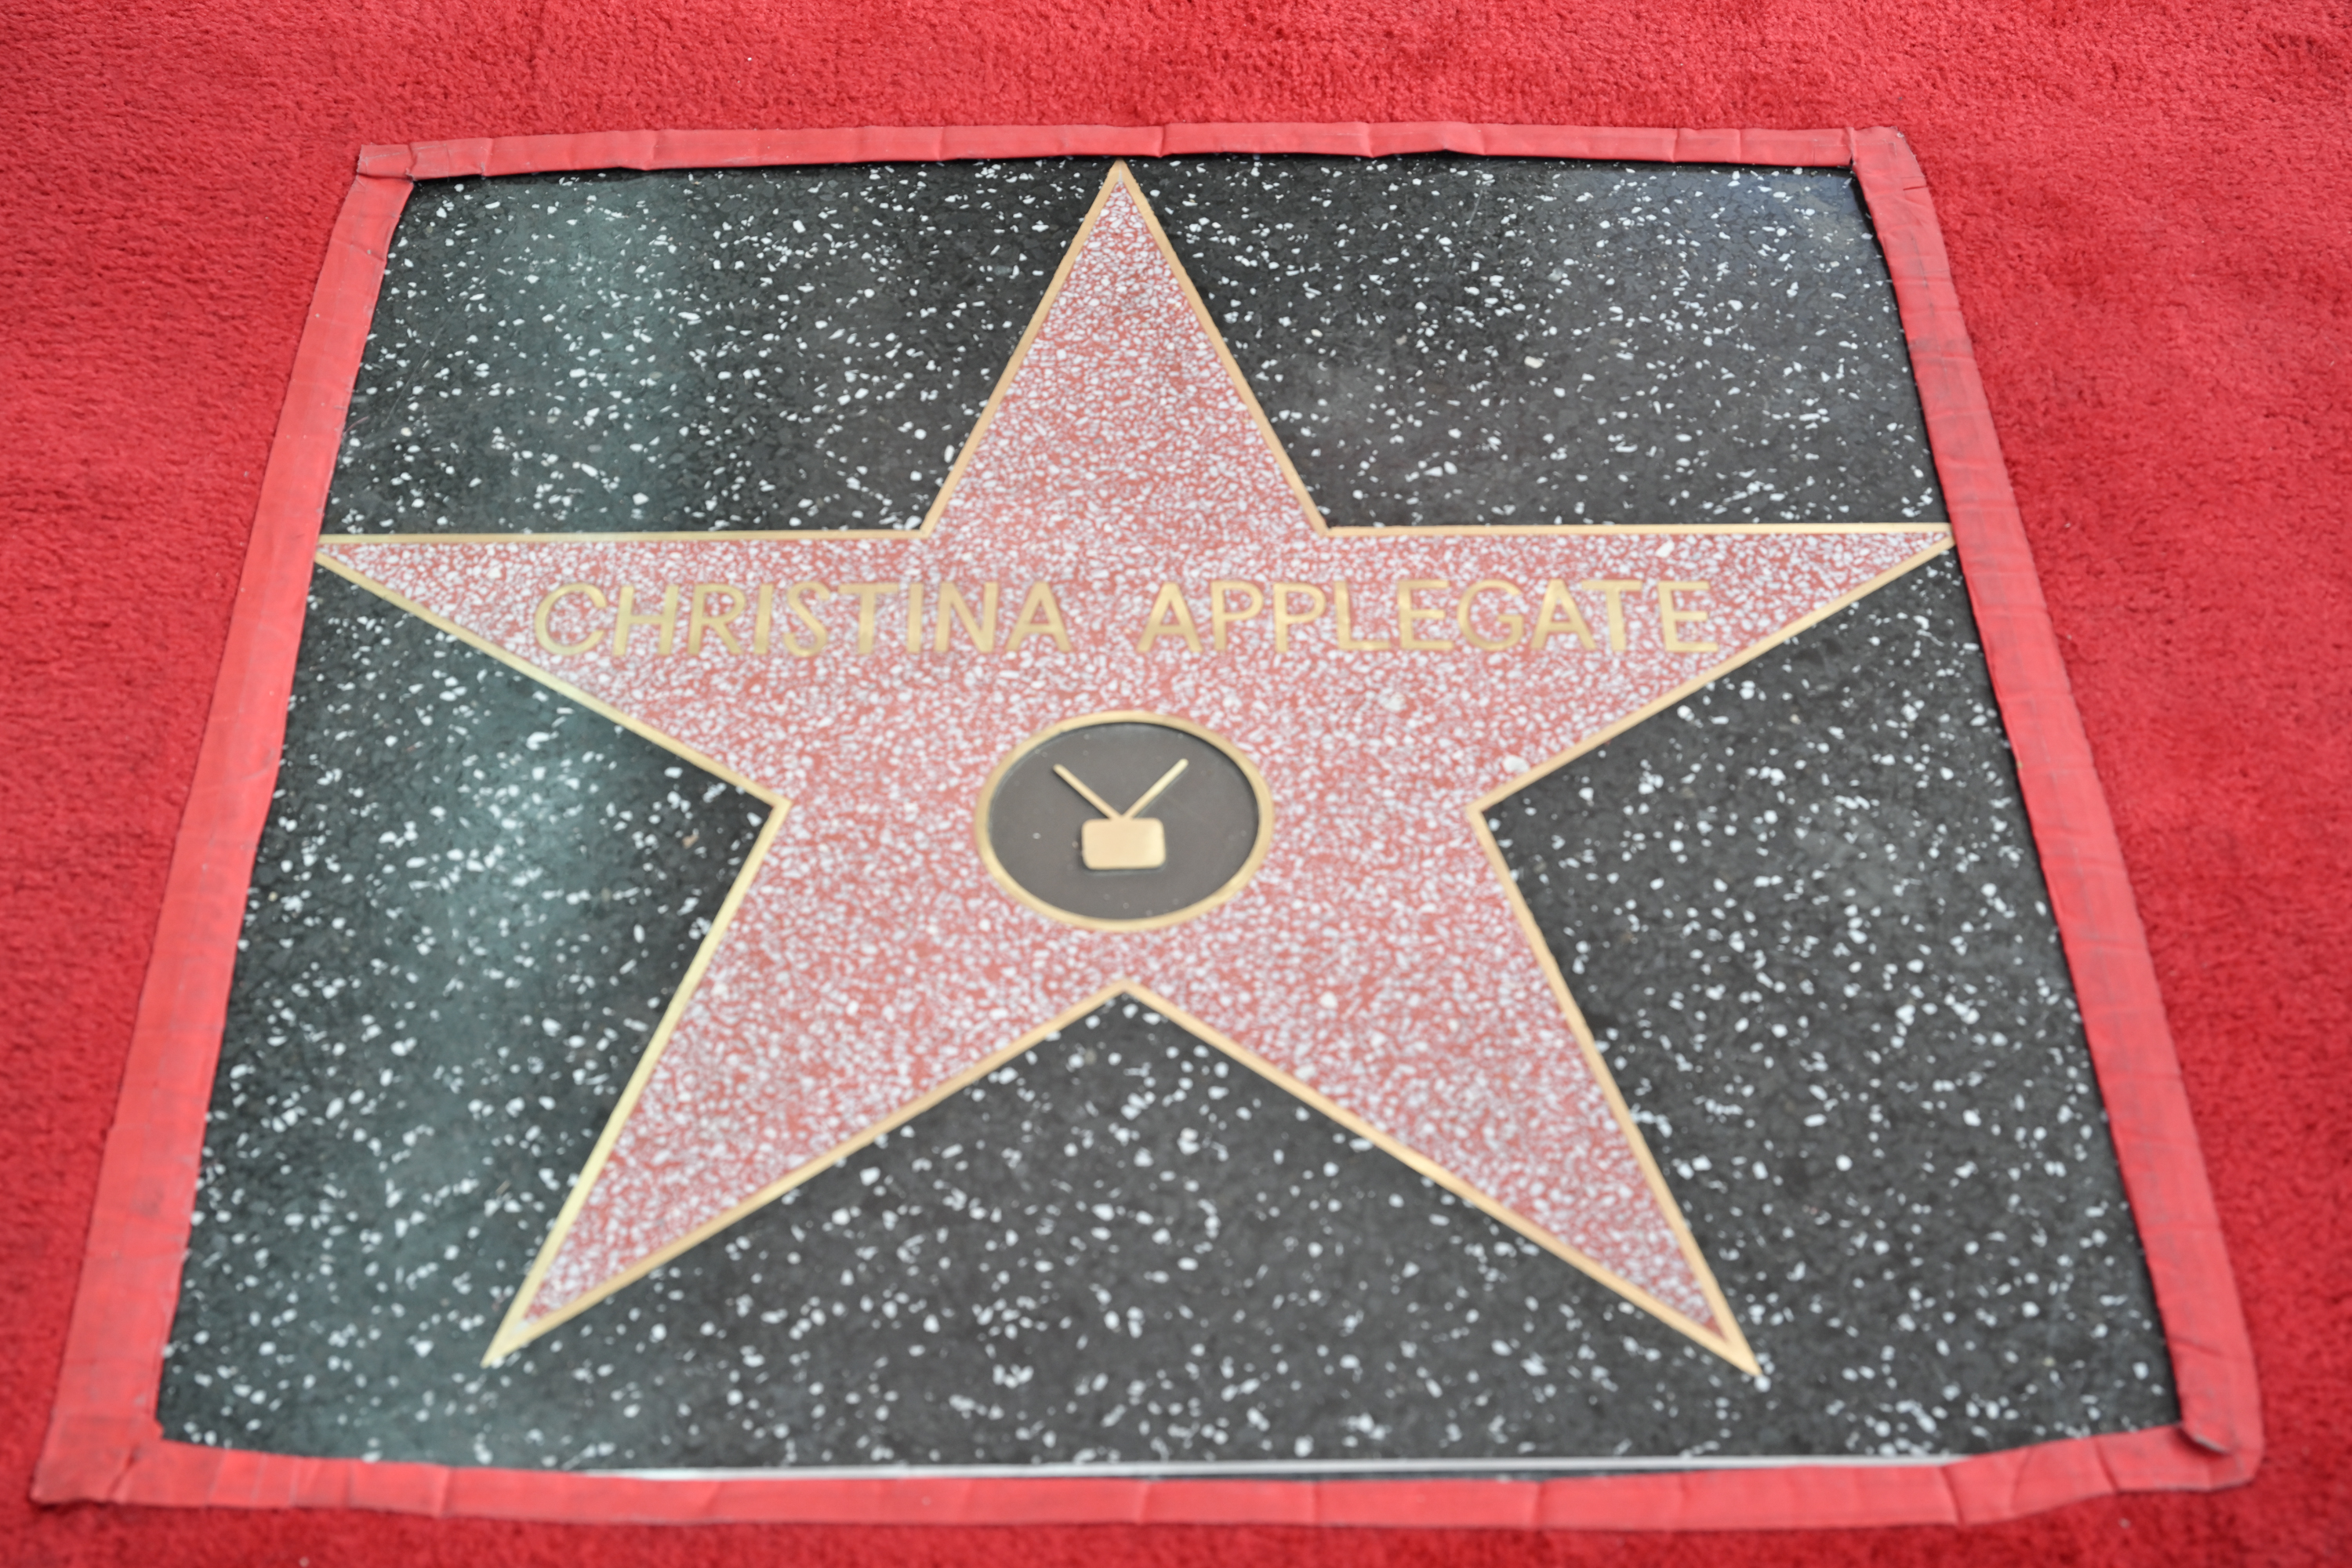 A view of Christina Applegate's star on the Hollywood Walk of Fame during her star ceremony in Los Angeles, California on November 14, 2022. | Source: Getty Images